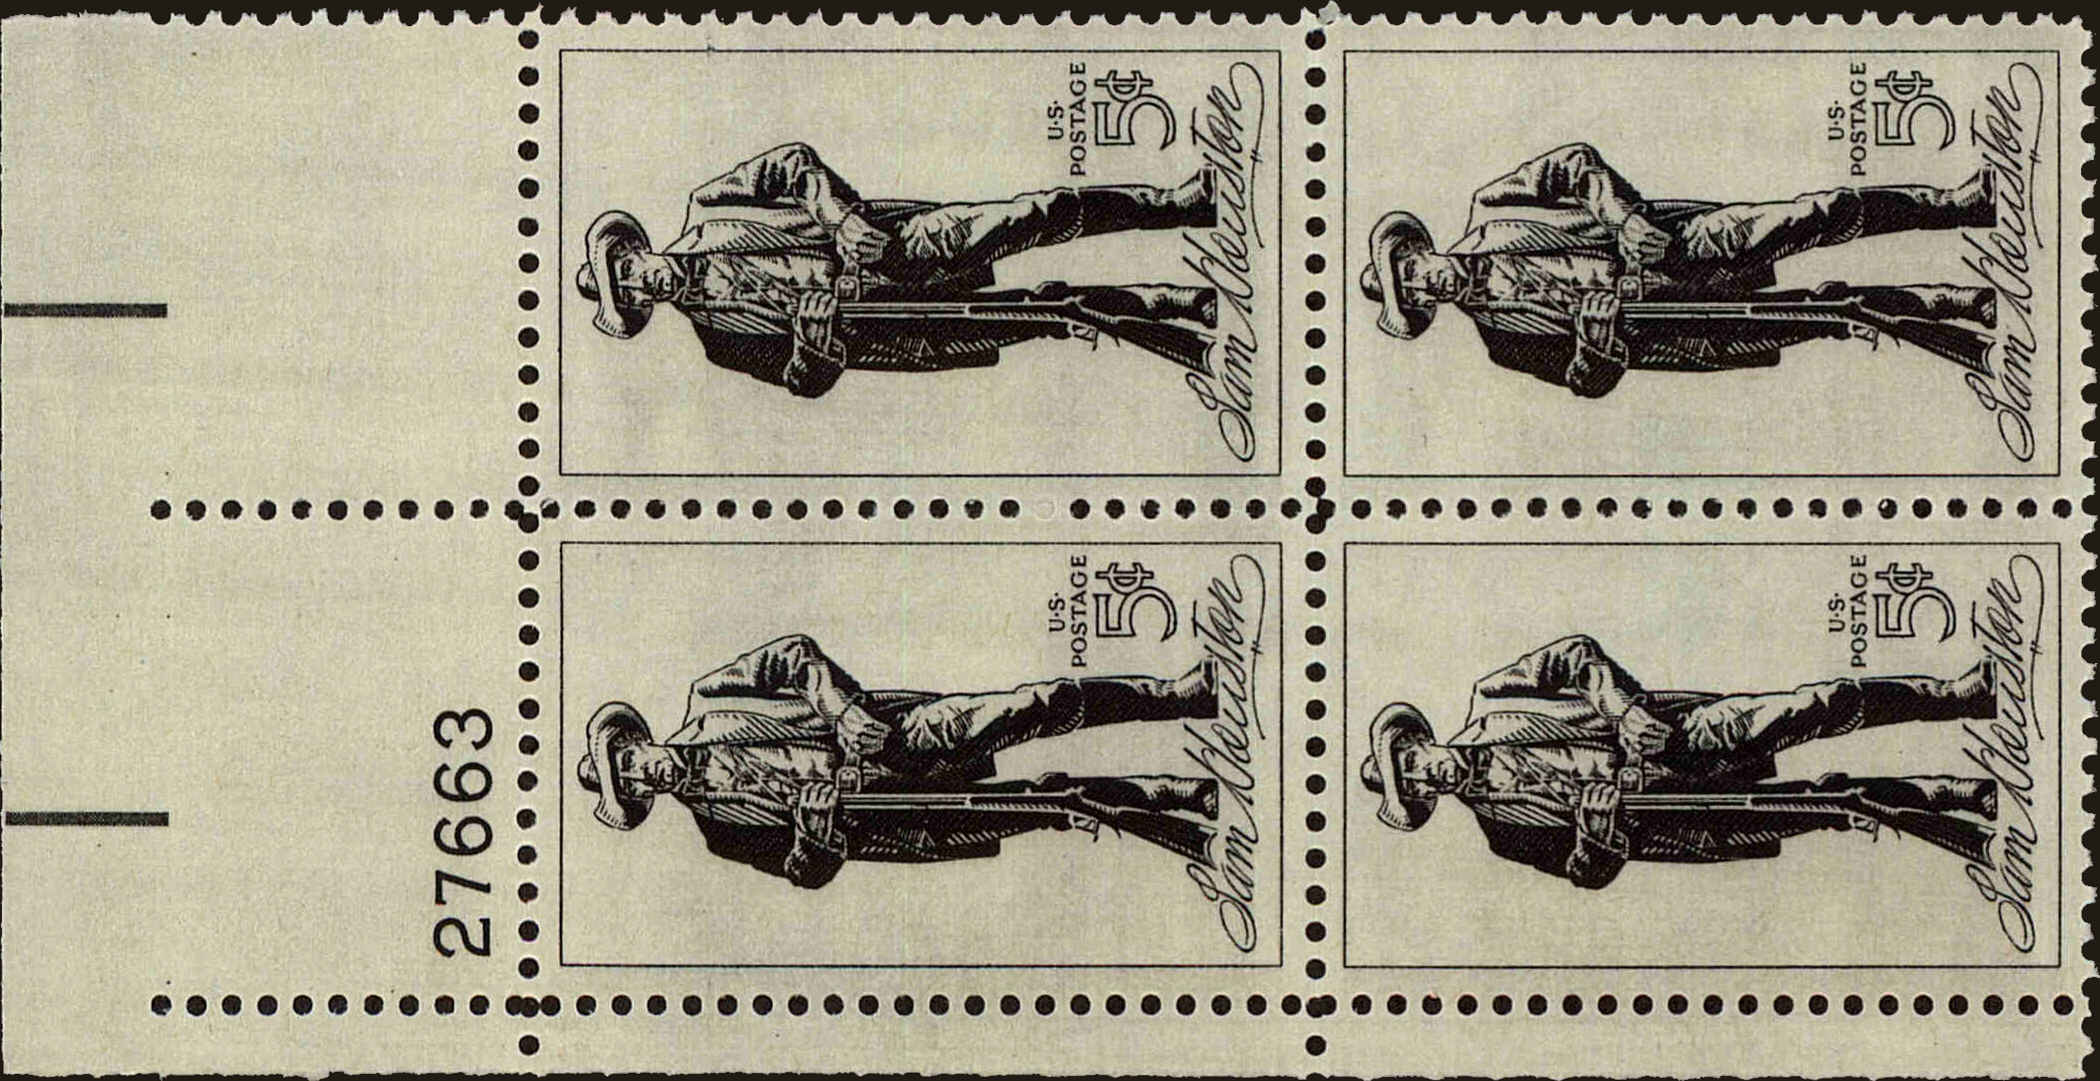 Front view of United States 1242 collectors stamp